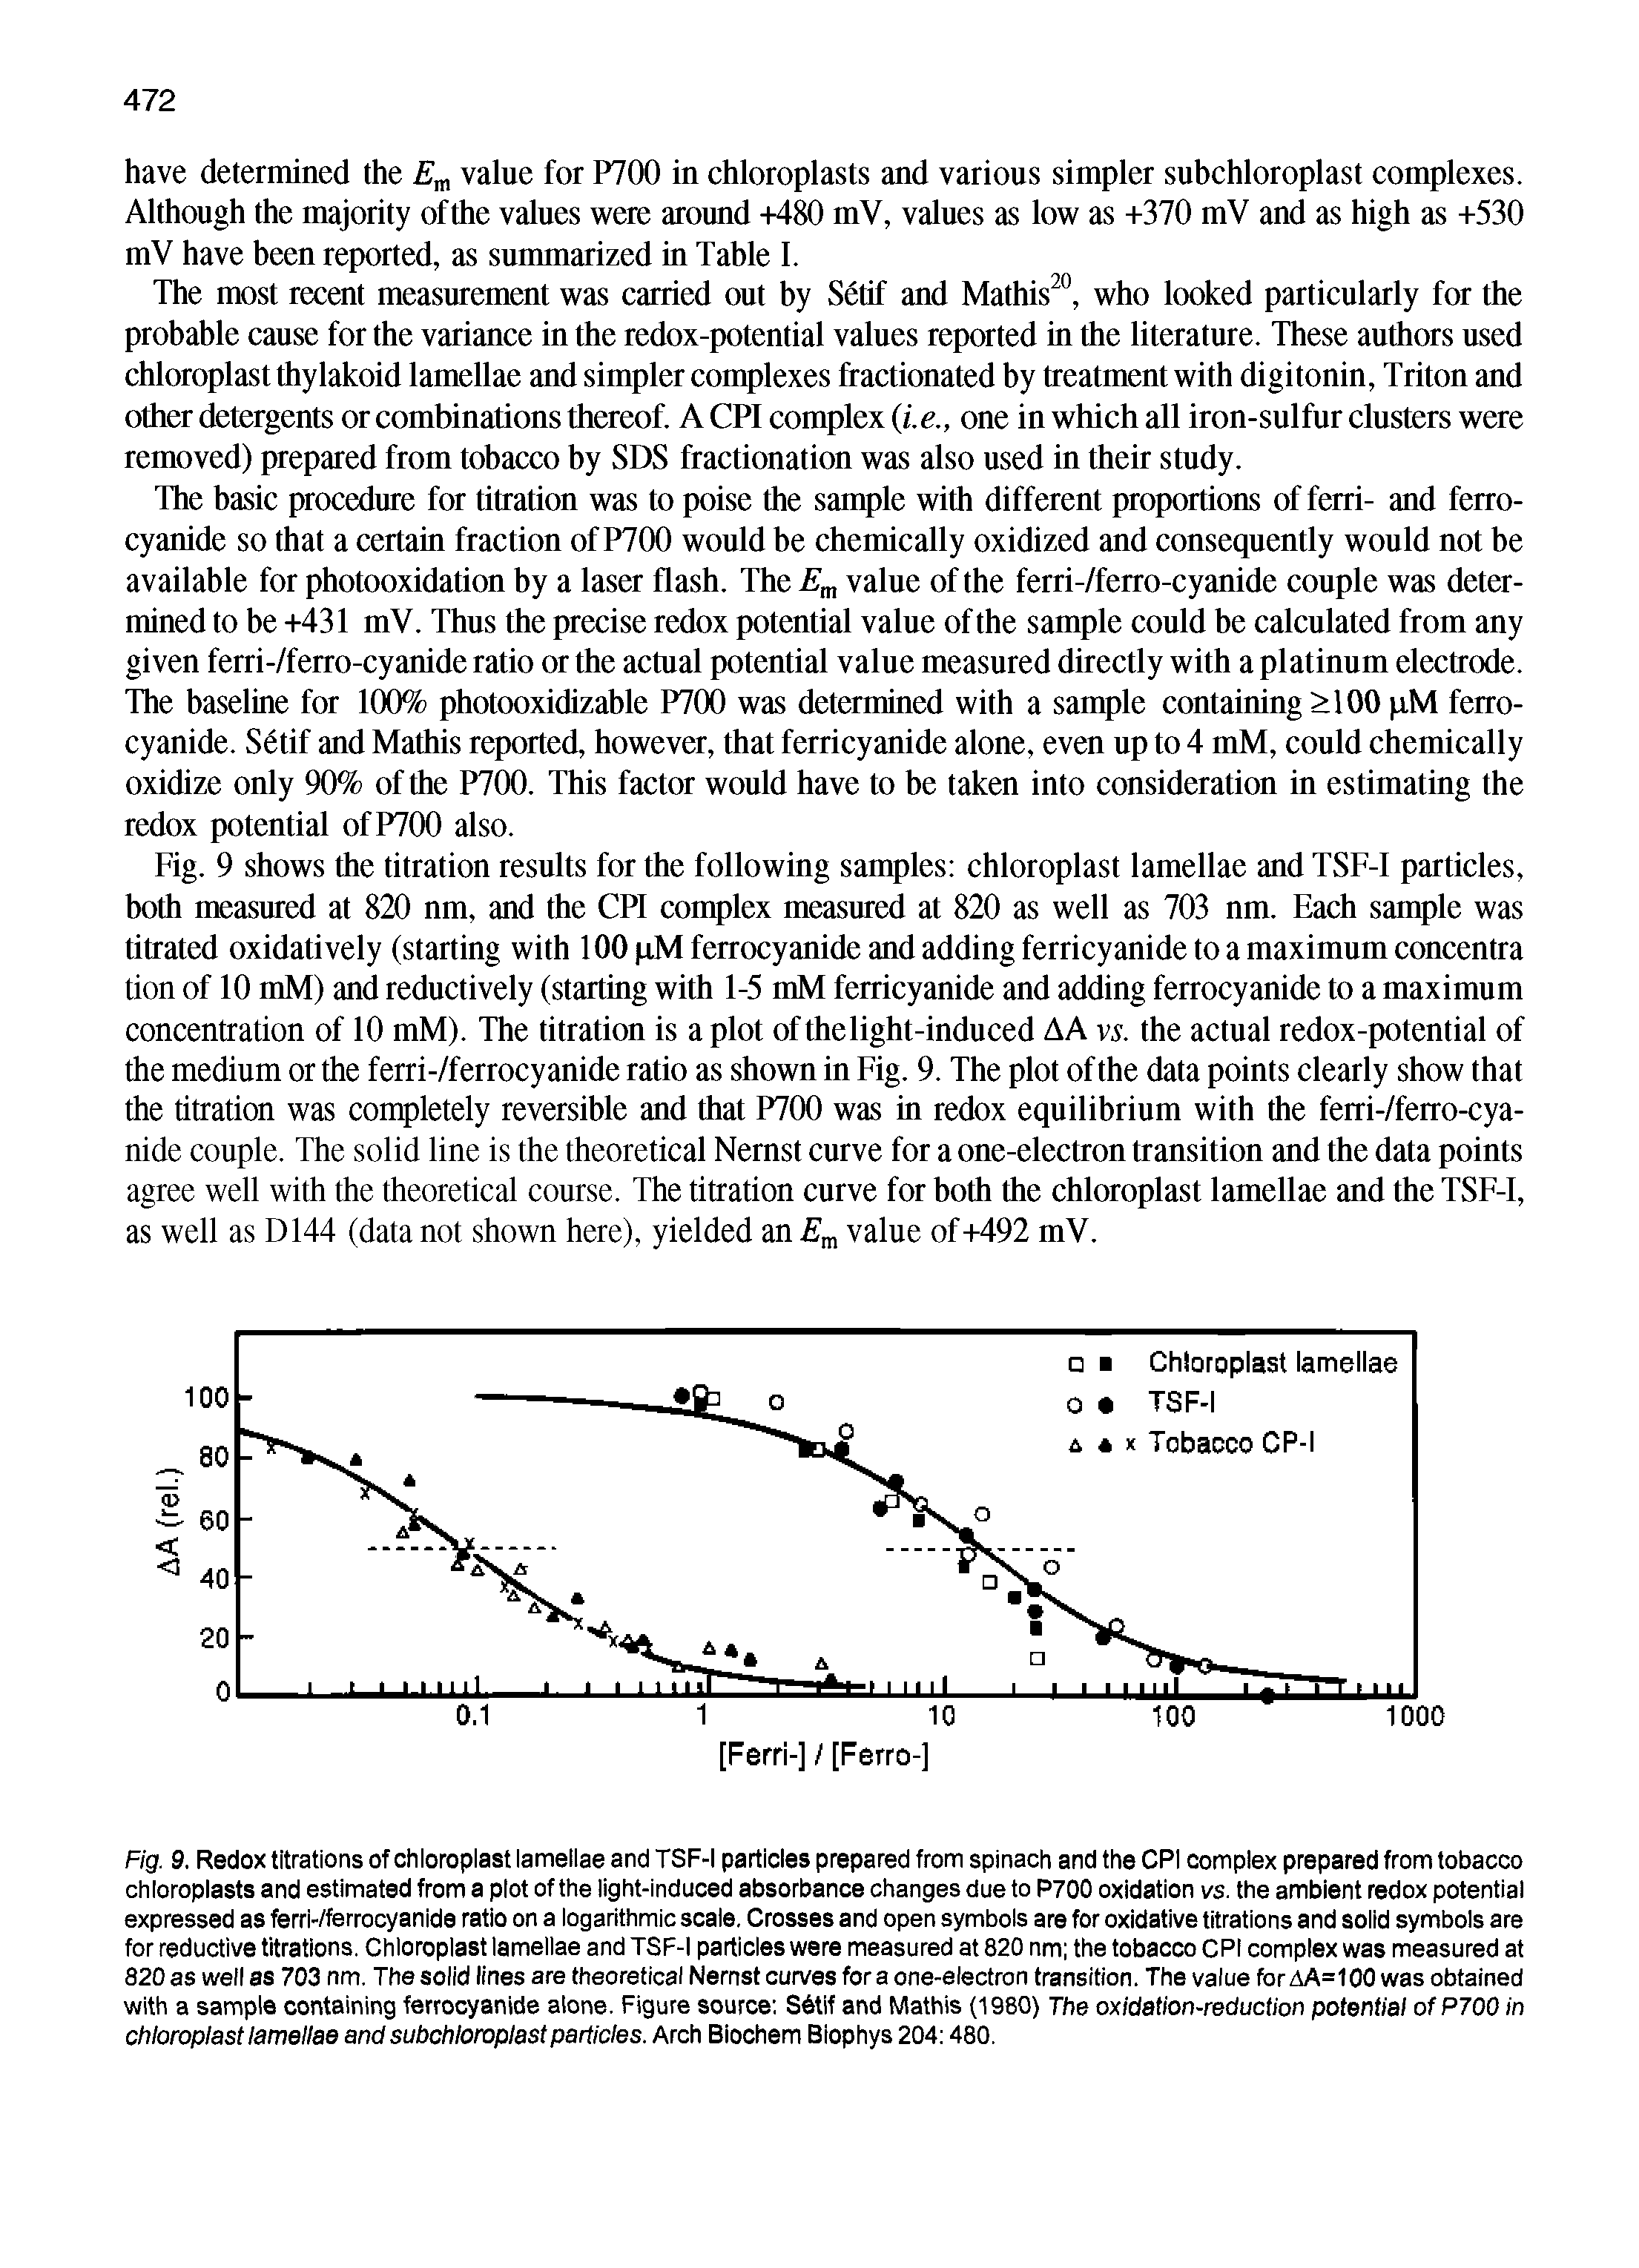 Fig. 9 shows the titration results for the following samples chloroplast lamellae and TSF-1 particles, both measured at 820 nm, and the CPI complex measured at 820 as well as 703 nm. Each sample was titrated oxidatively (starting with 100 pM ferrocyanide and adding ferricyanide to a maximum concentra tion of 10 mM) and reductively (starting with 1-5 mM ferricyanide and adding ferrocyanide to a maximum concentration of 10 mM). The titration is a plot of the light-induced AA V5. the actual redox-potential of the medium or the ferri-/ferrocyanide ratio as shown in Fig. 9. The plot of the data points clearly show that the titration was completely reversible and that P700 was in redox equilibrium with the ferri-/ferro-cya-nide couple. The solid line is the theoretical Nernst curve for a one-electron transition and the data points agree well with the theoretical course. The titration curve for both the chloroplast lamellae and the TSF-1, as well as D144 (data not shown here), yielded an value of+492 mV.